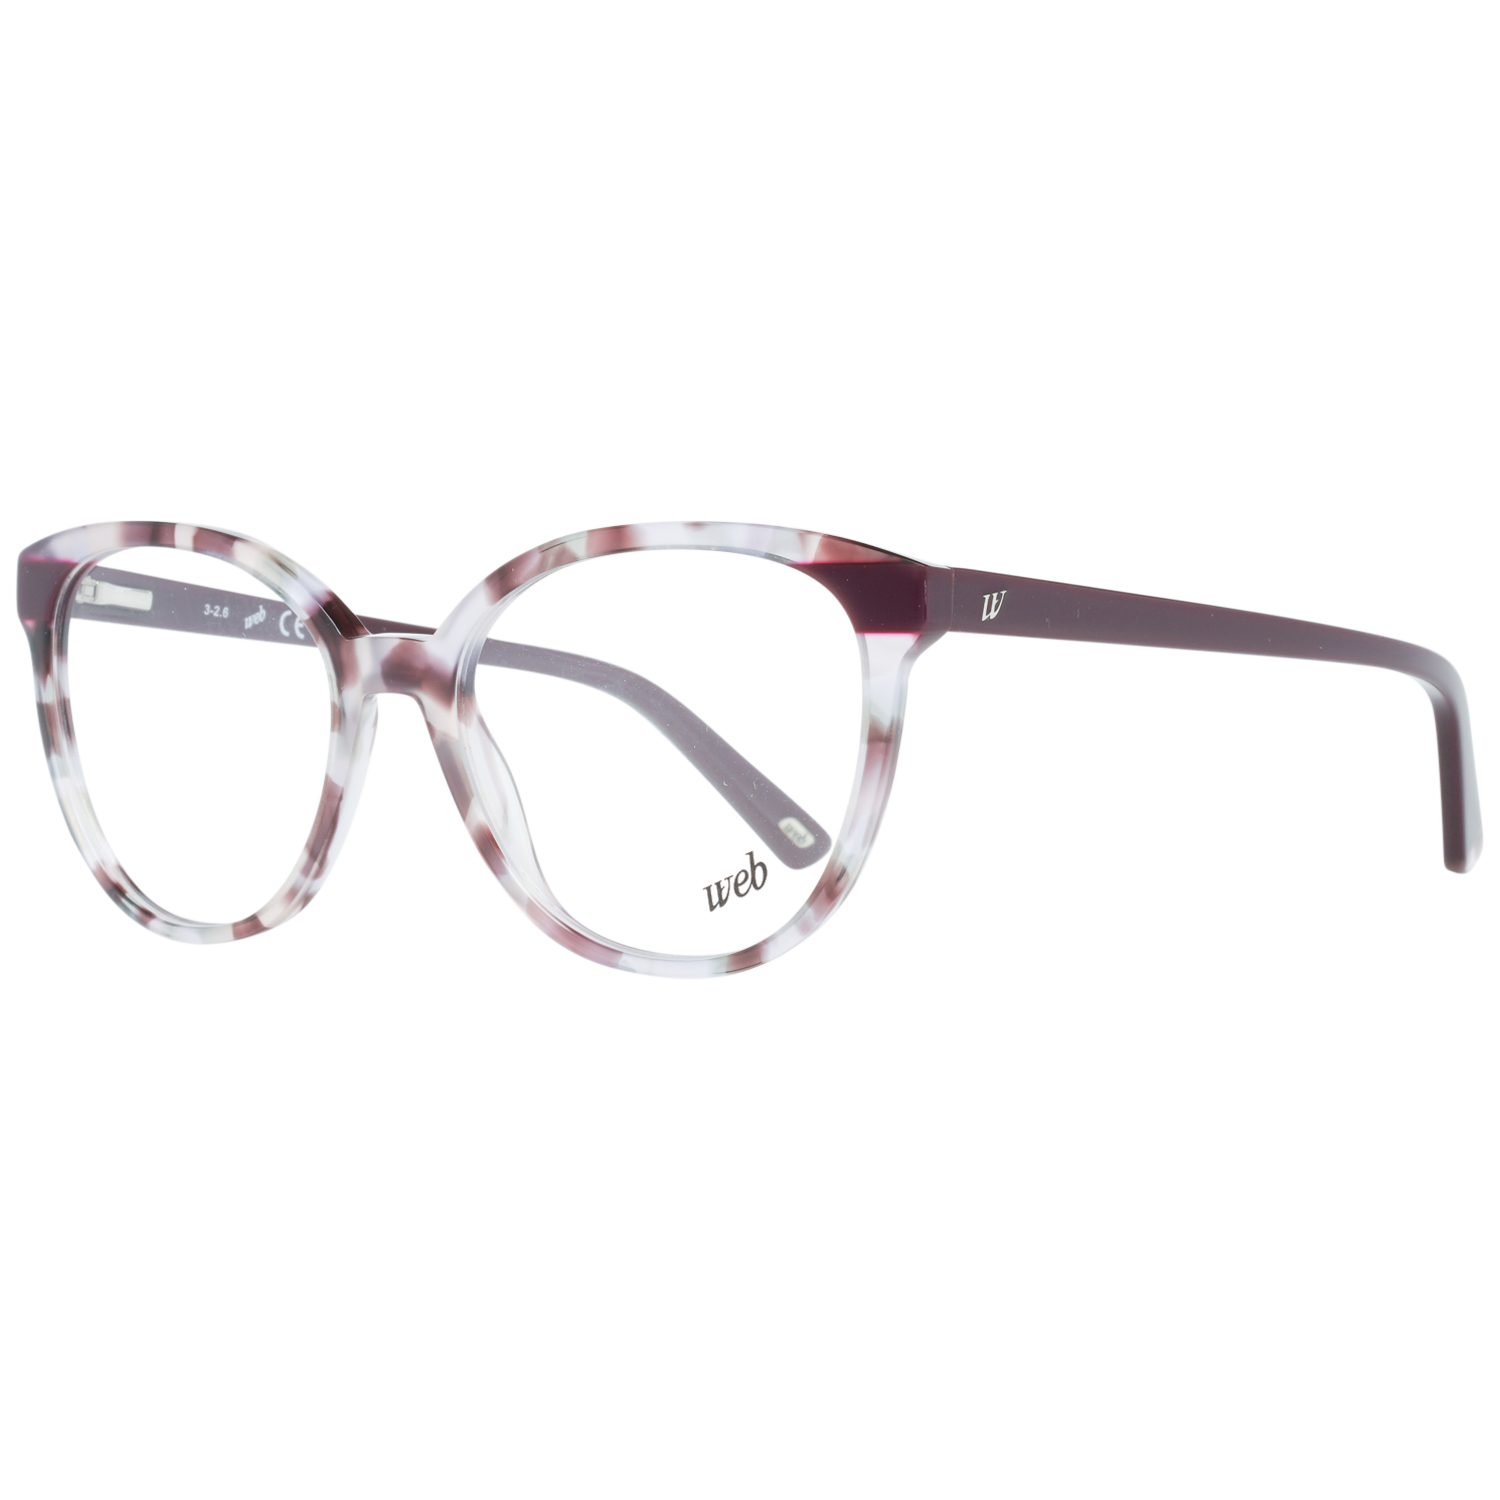 Tods Optical Frame TO5197 056 52 Brown